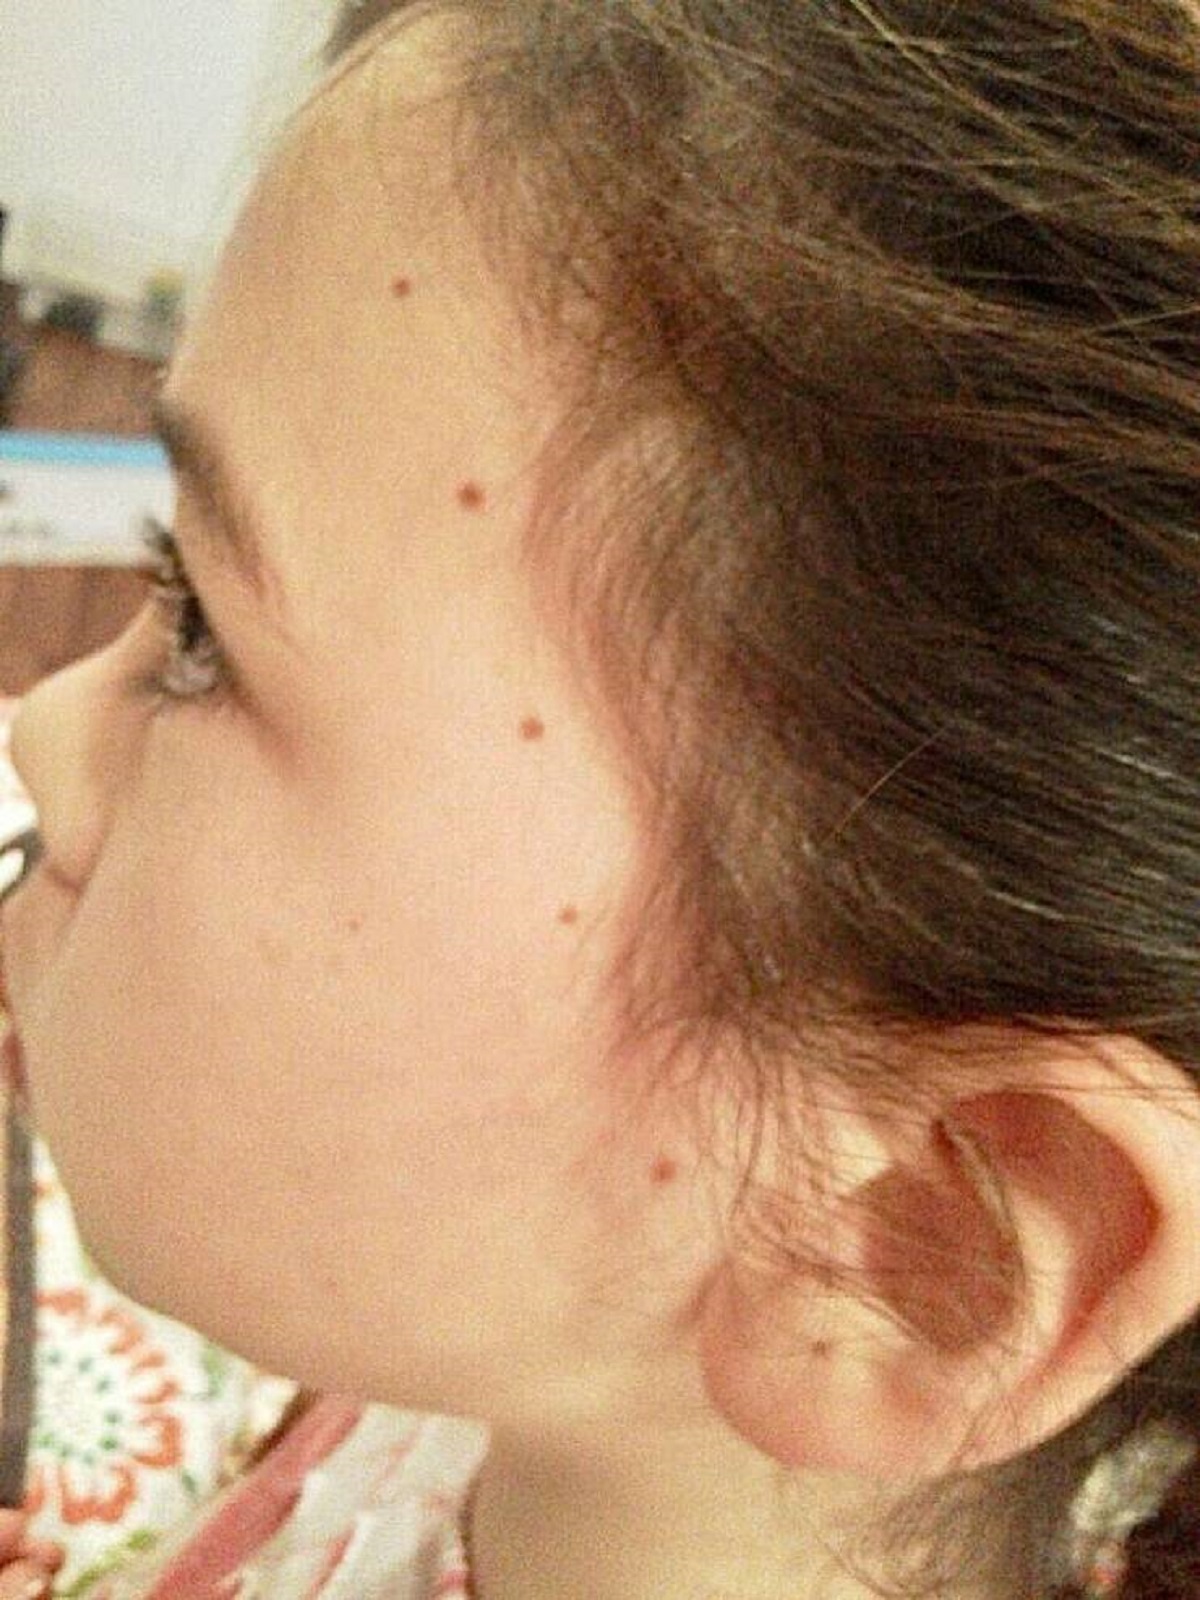 "My daughter’s freckles are in a straight line"